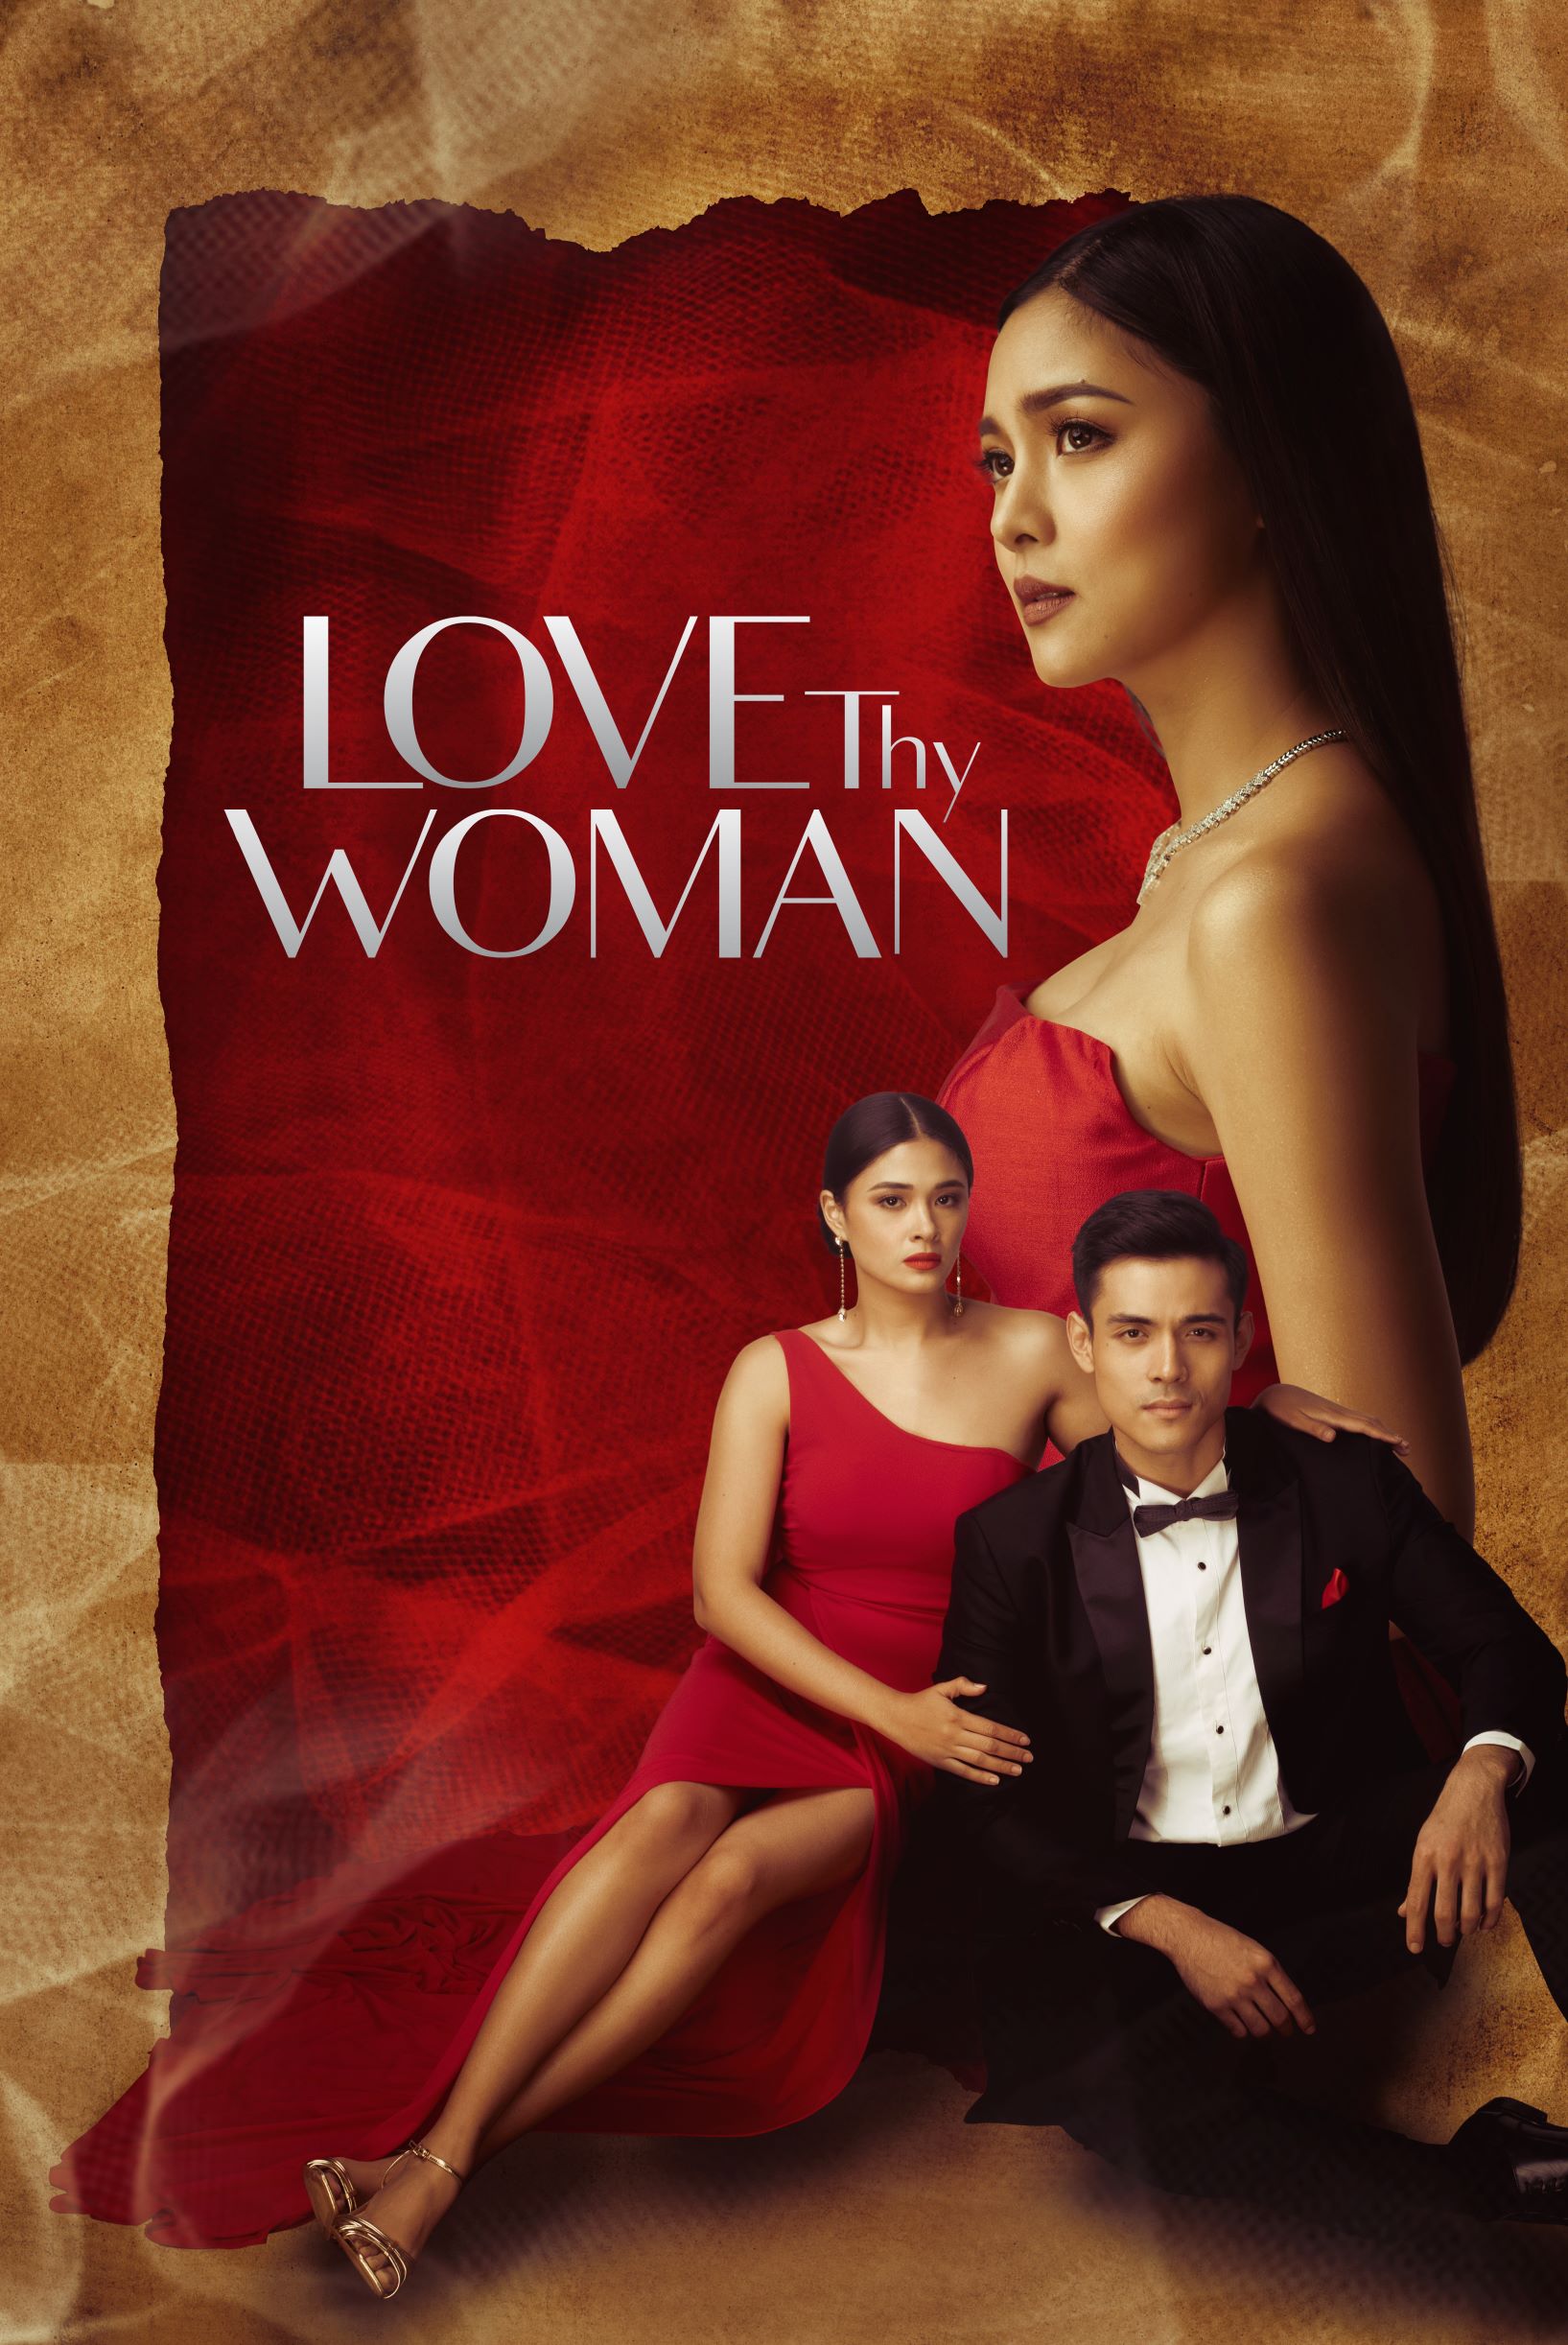 Abs Cbn Teleseryes And Films To Bring Entertainment To Africa Asia And Latin America